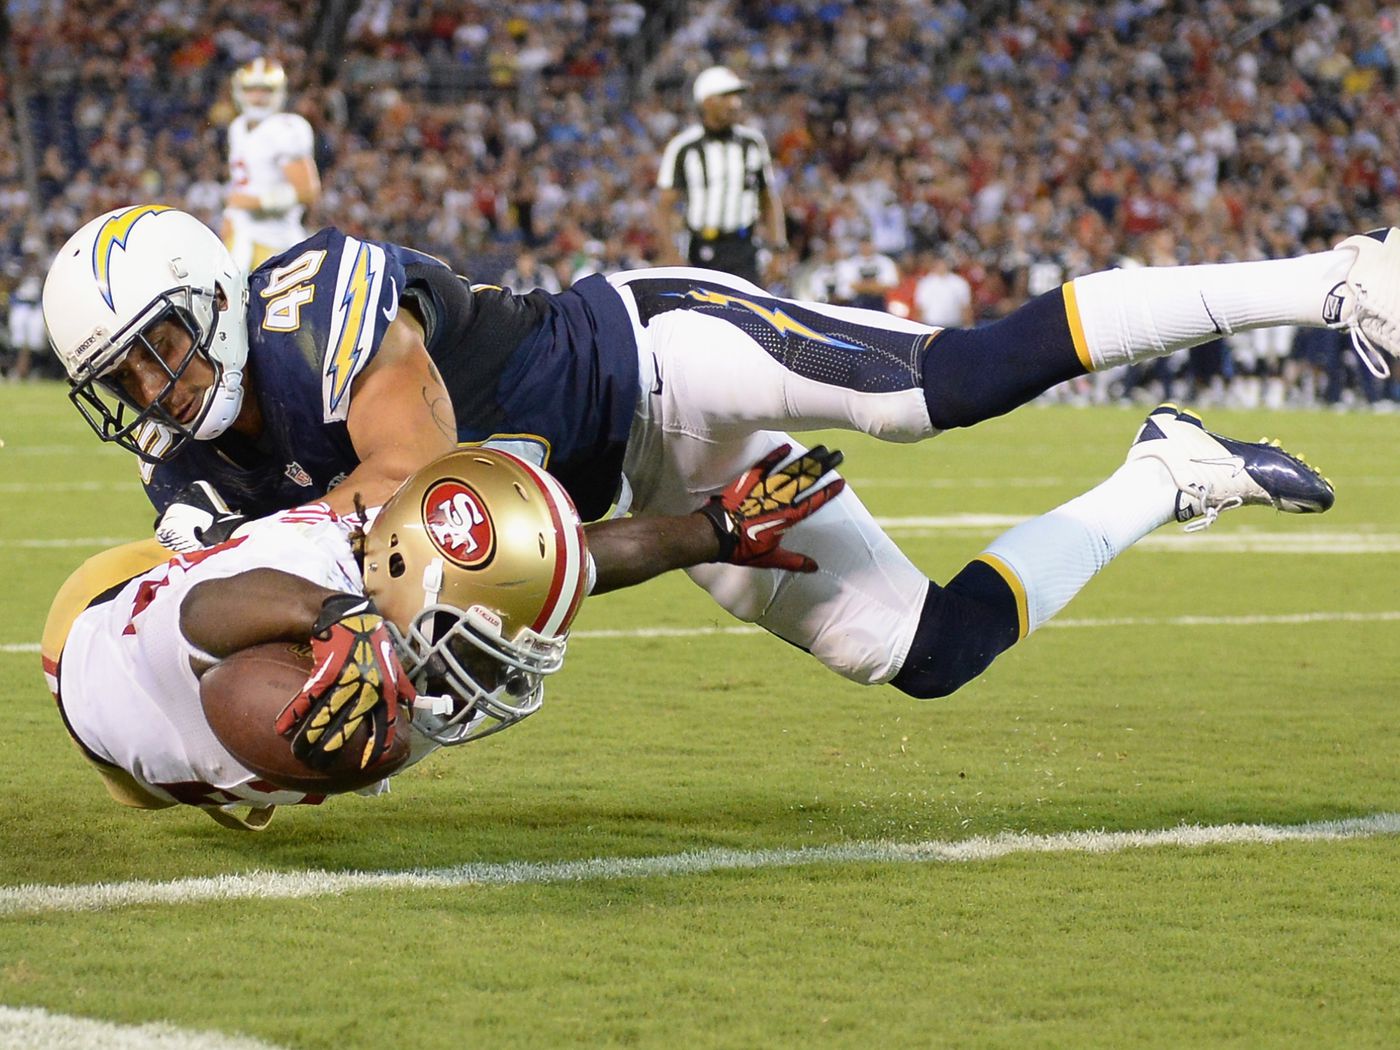 49ers vs. Chargers final score: San Francisco cruises to an easy